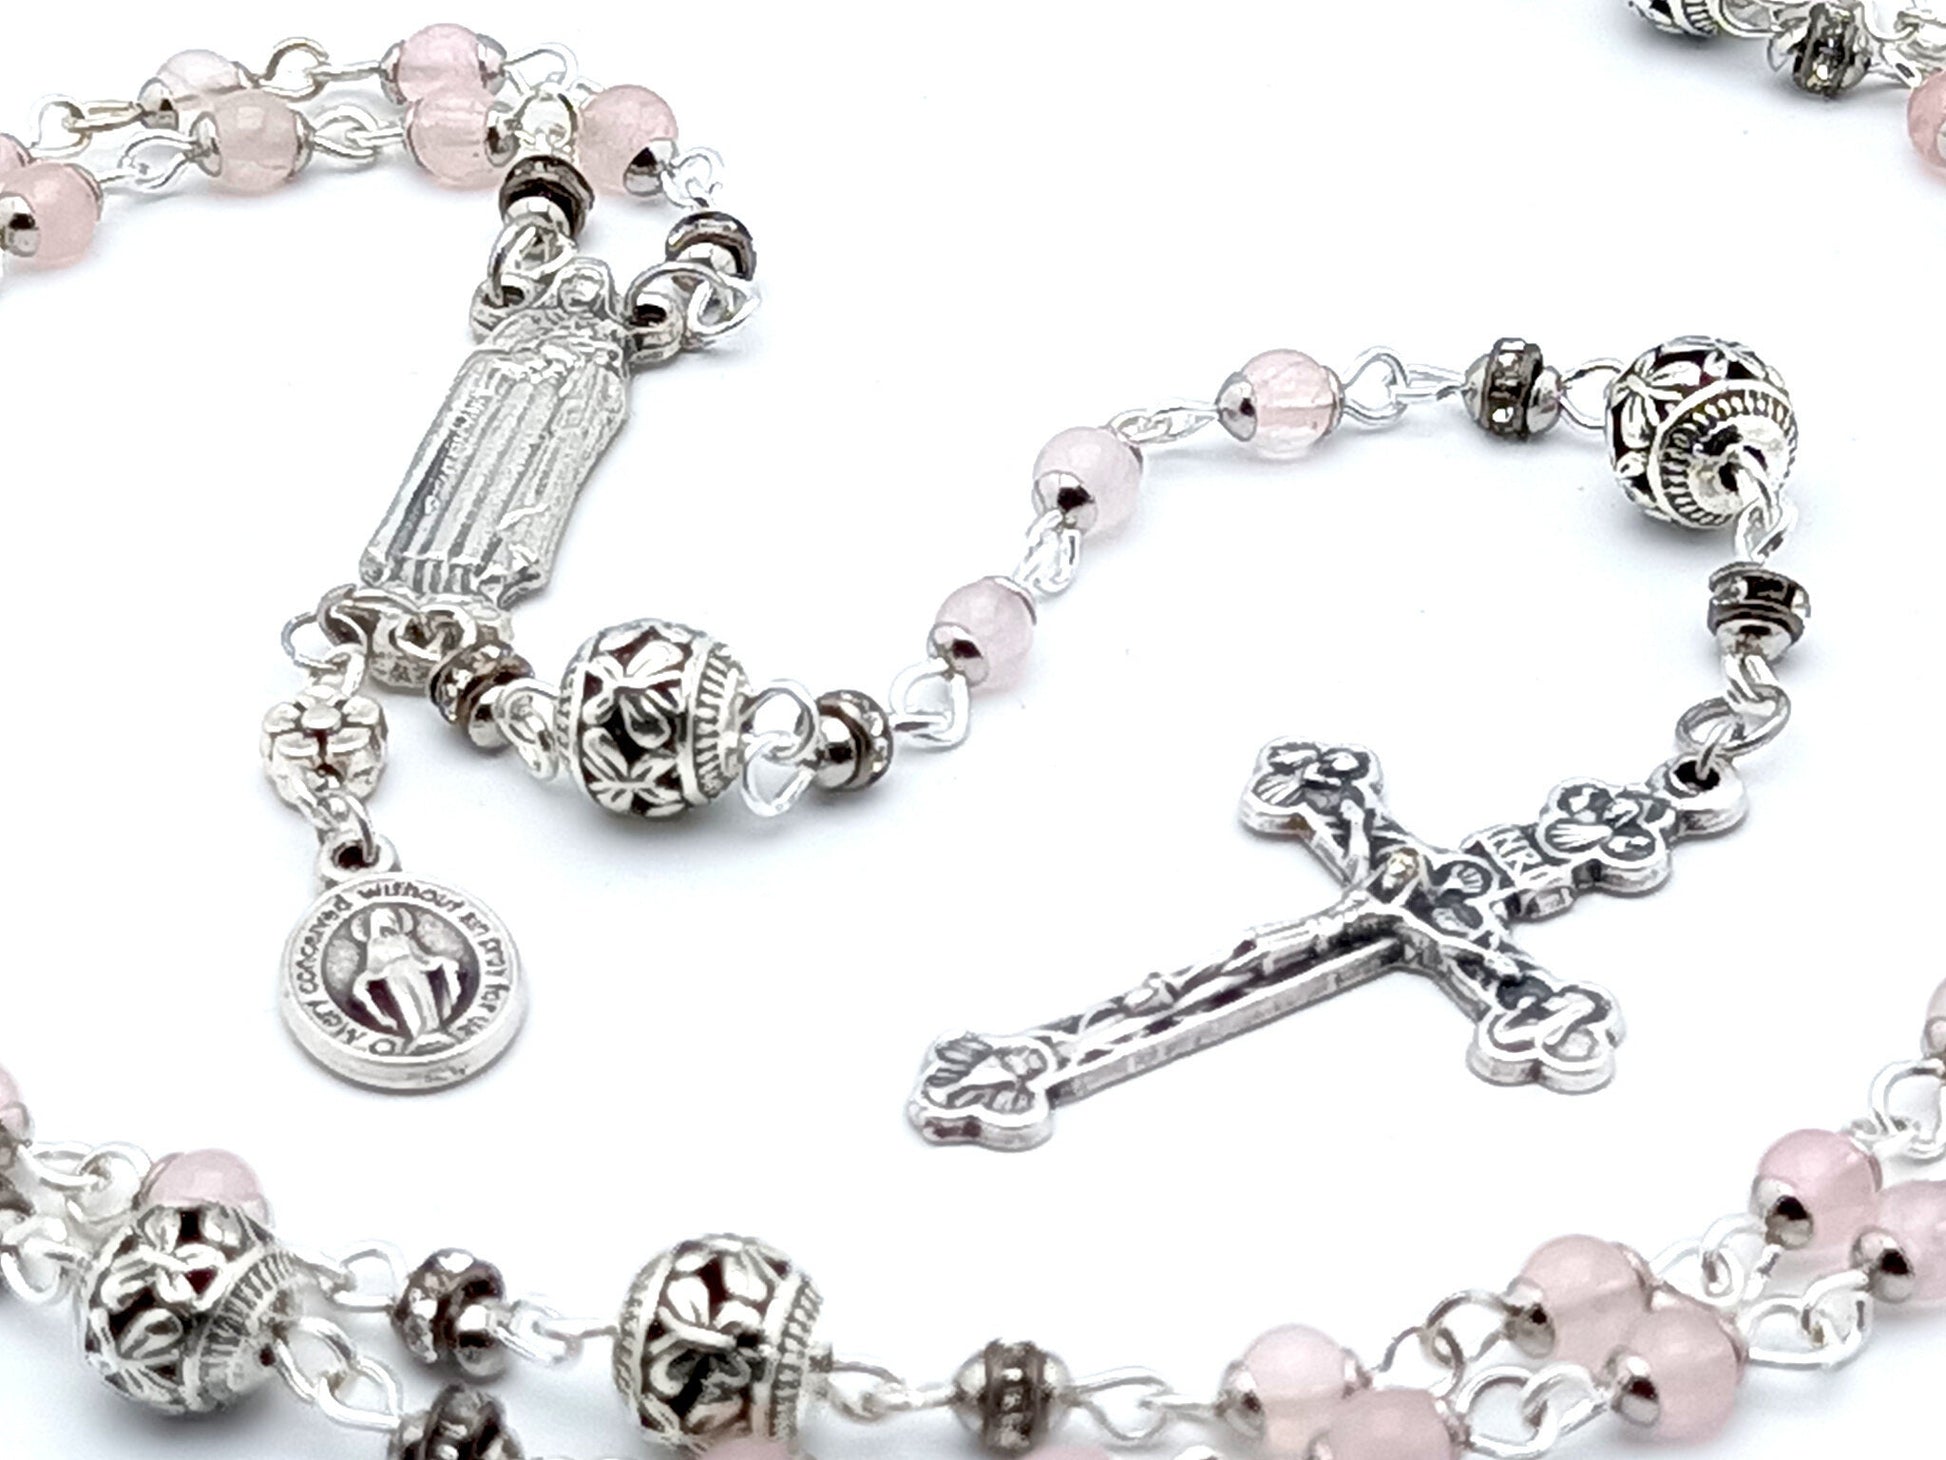 Saint Therese unique rosary beads with miniature pink opal gemstone beads, silver crucifix and centre medal.